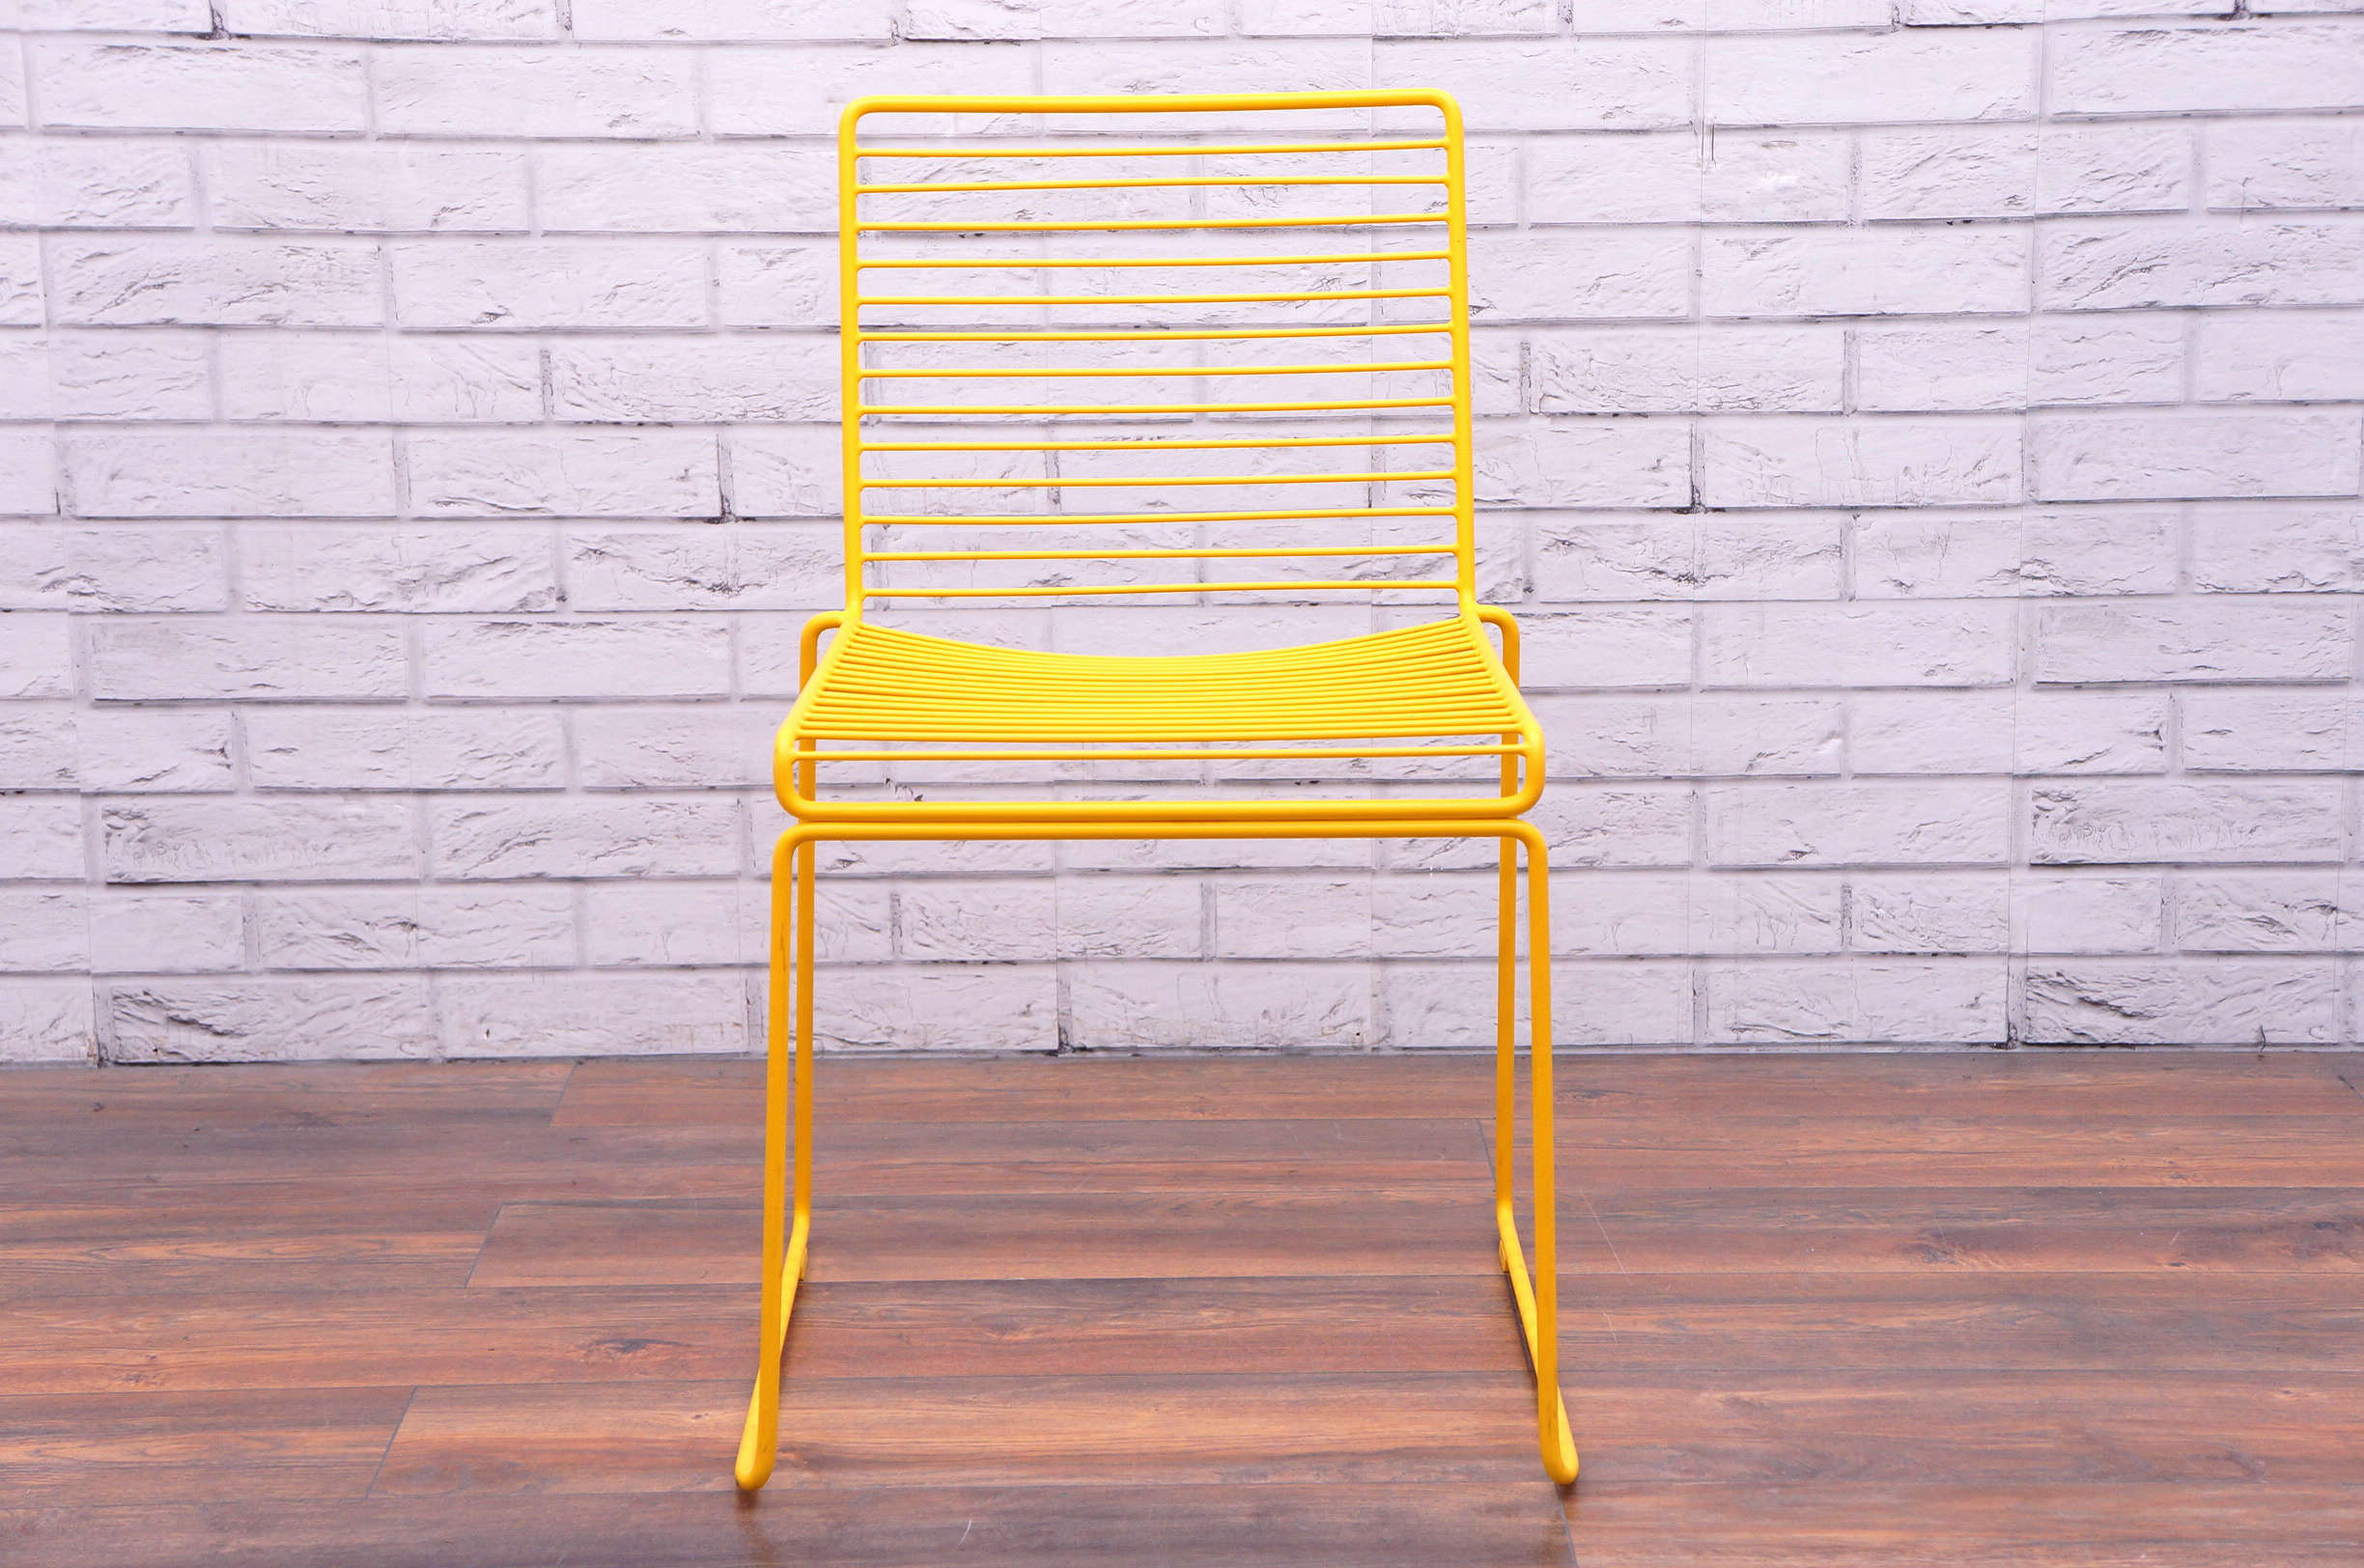 Wired Framed Chair In Yellow Office Resale